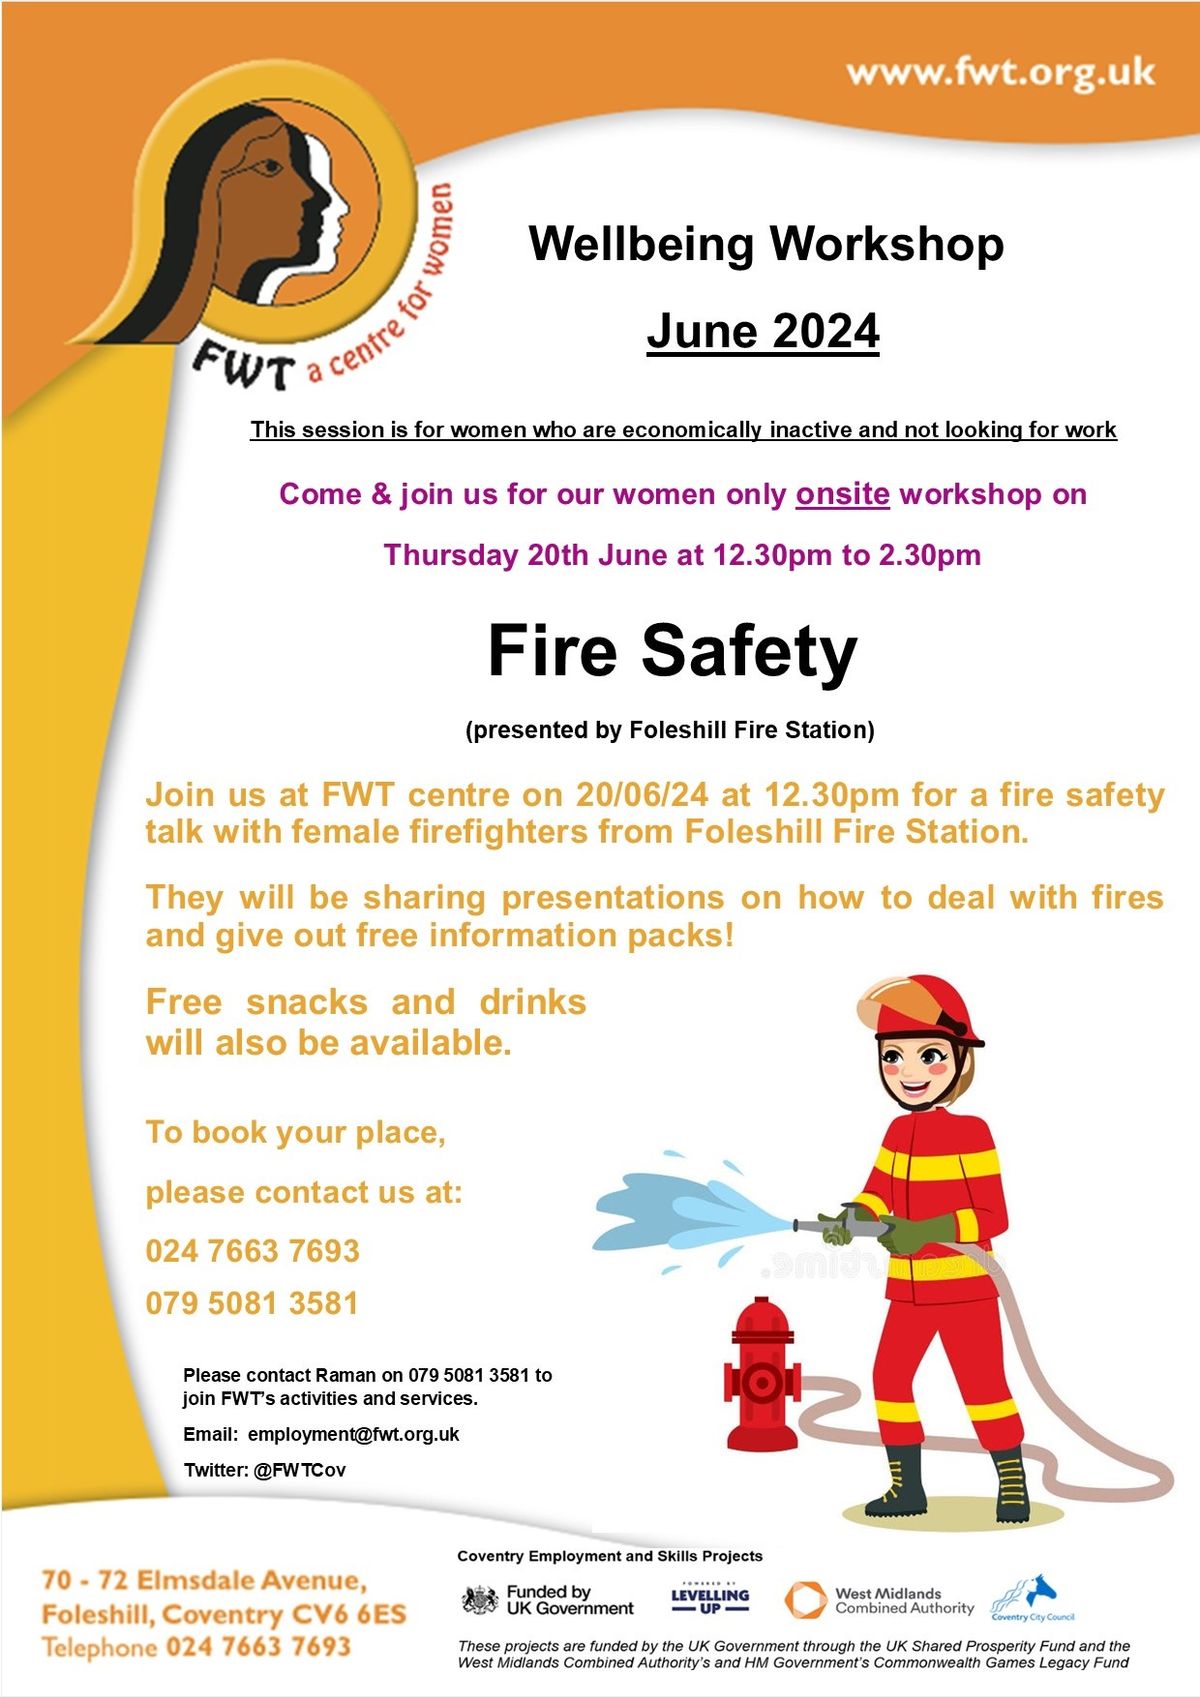 FREE Fire Safety workshop at FWT - presented by female firefighters